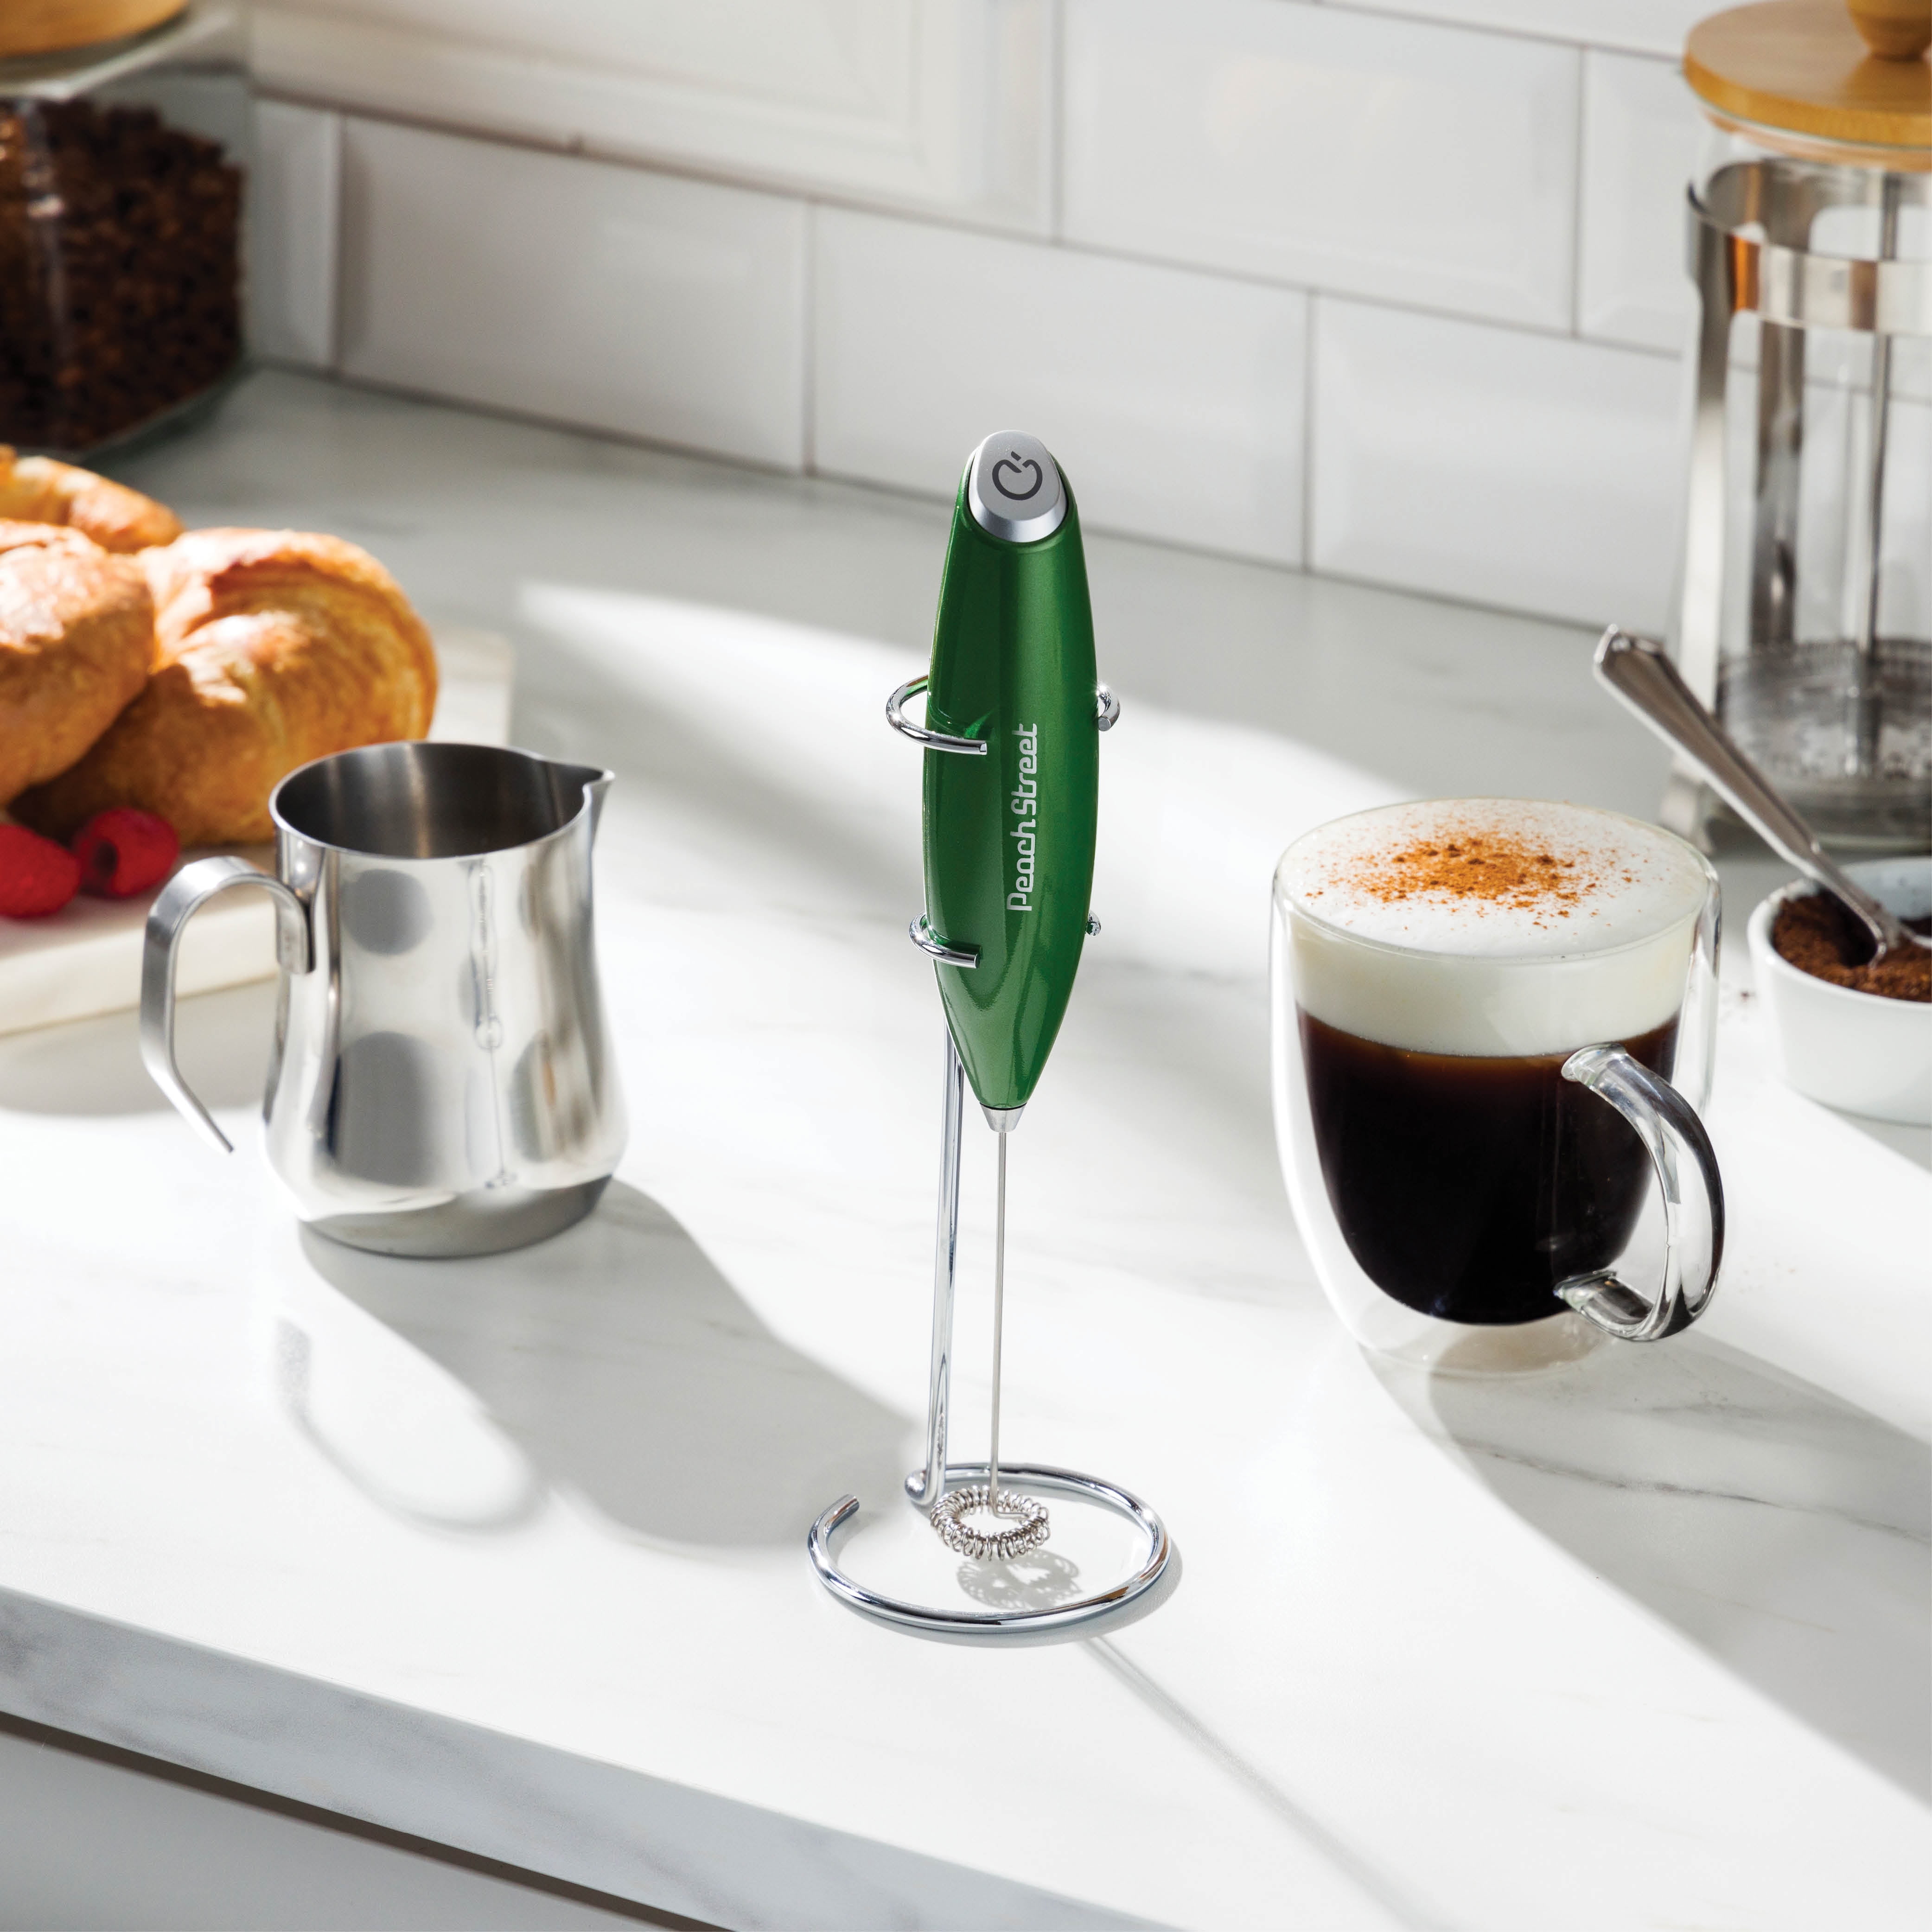 JEEXI Pro Milk Frother Handheld With Stand - Powerful Coffee